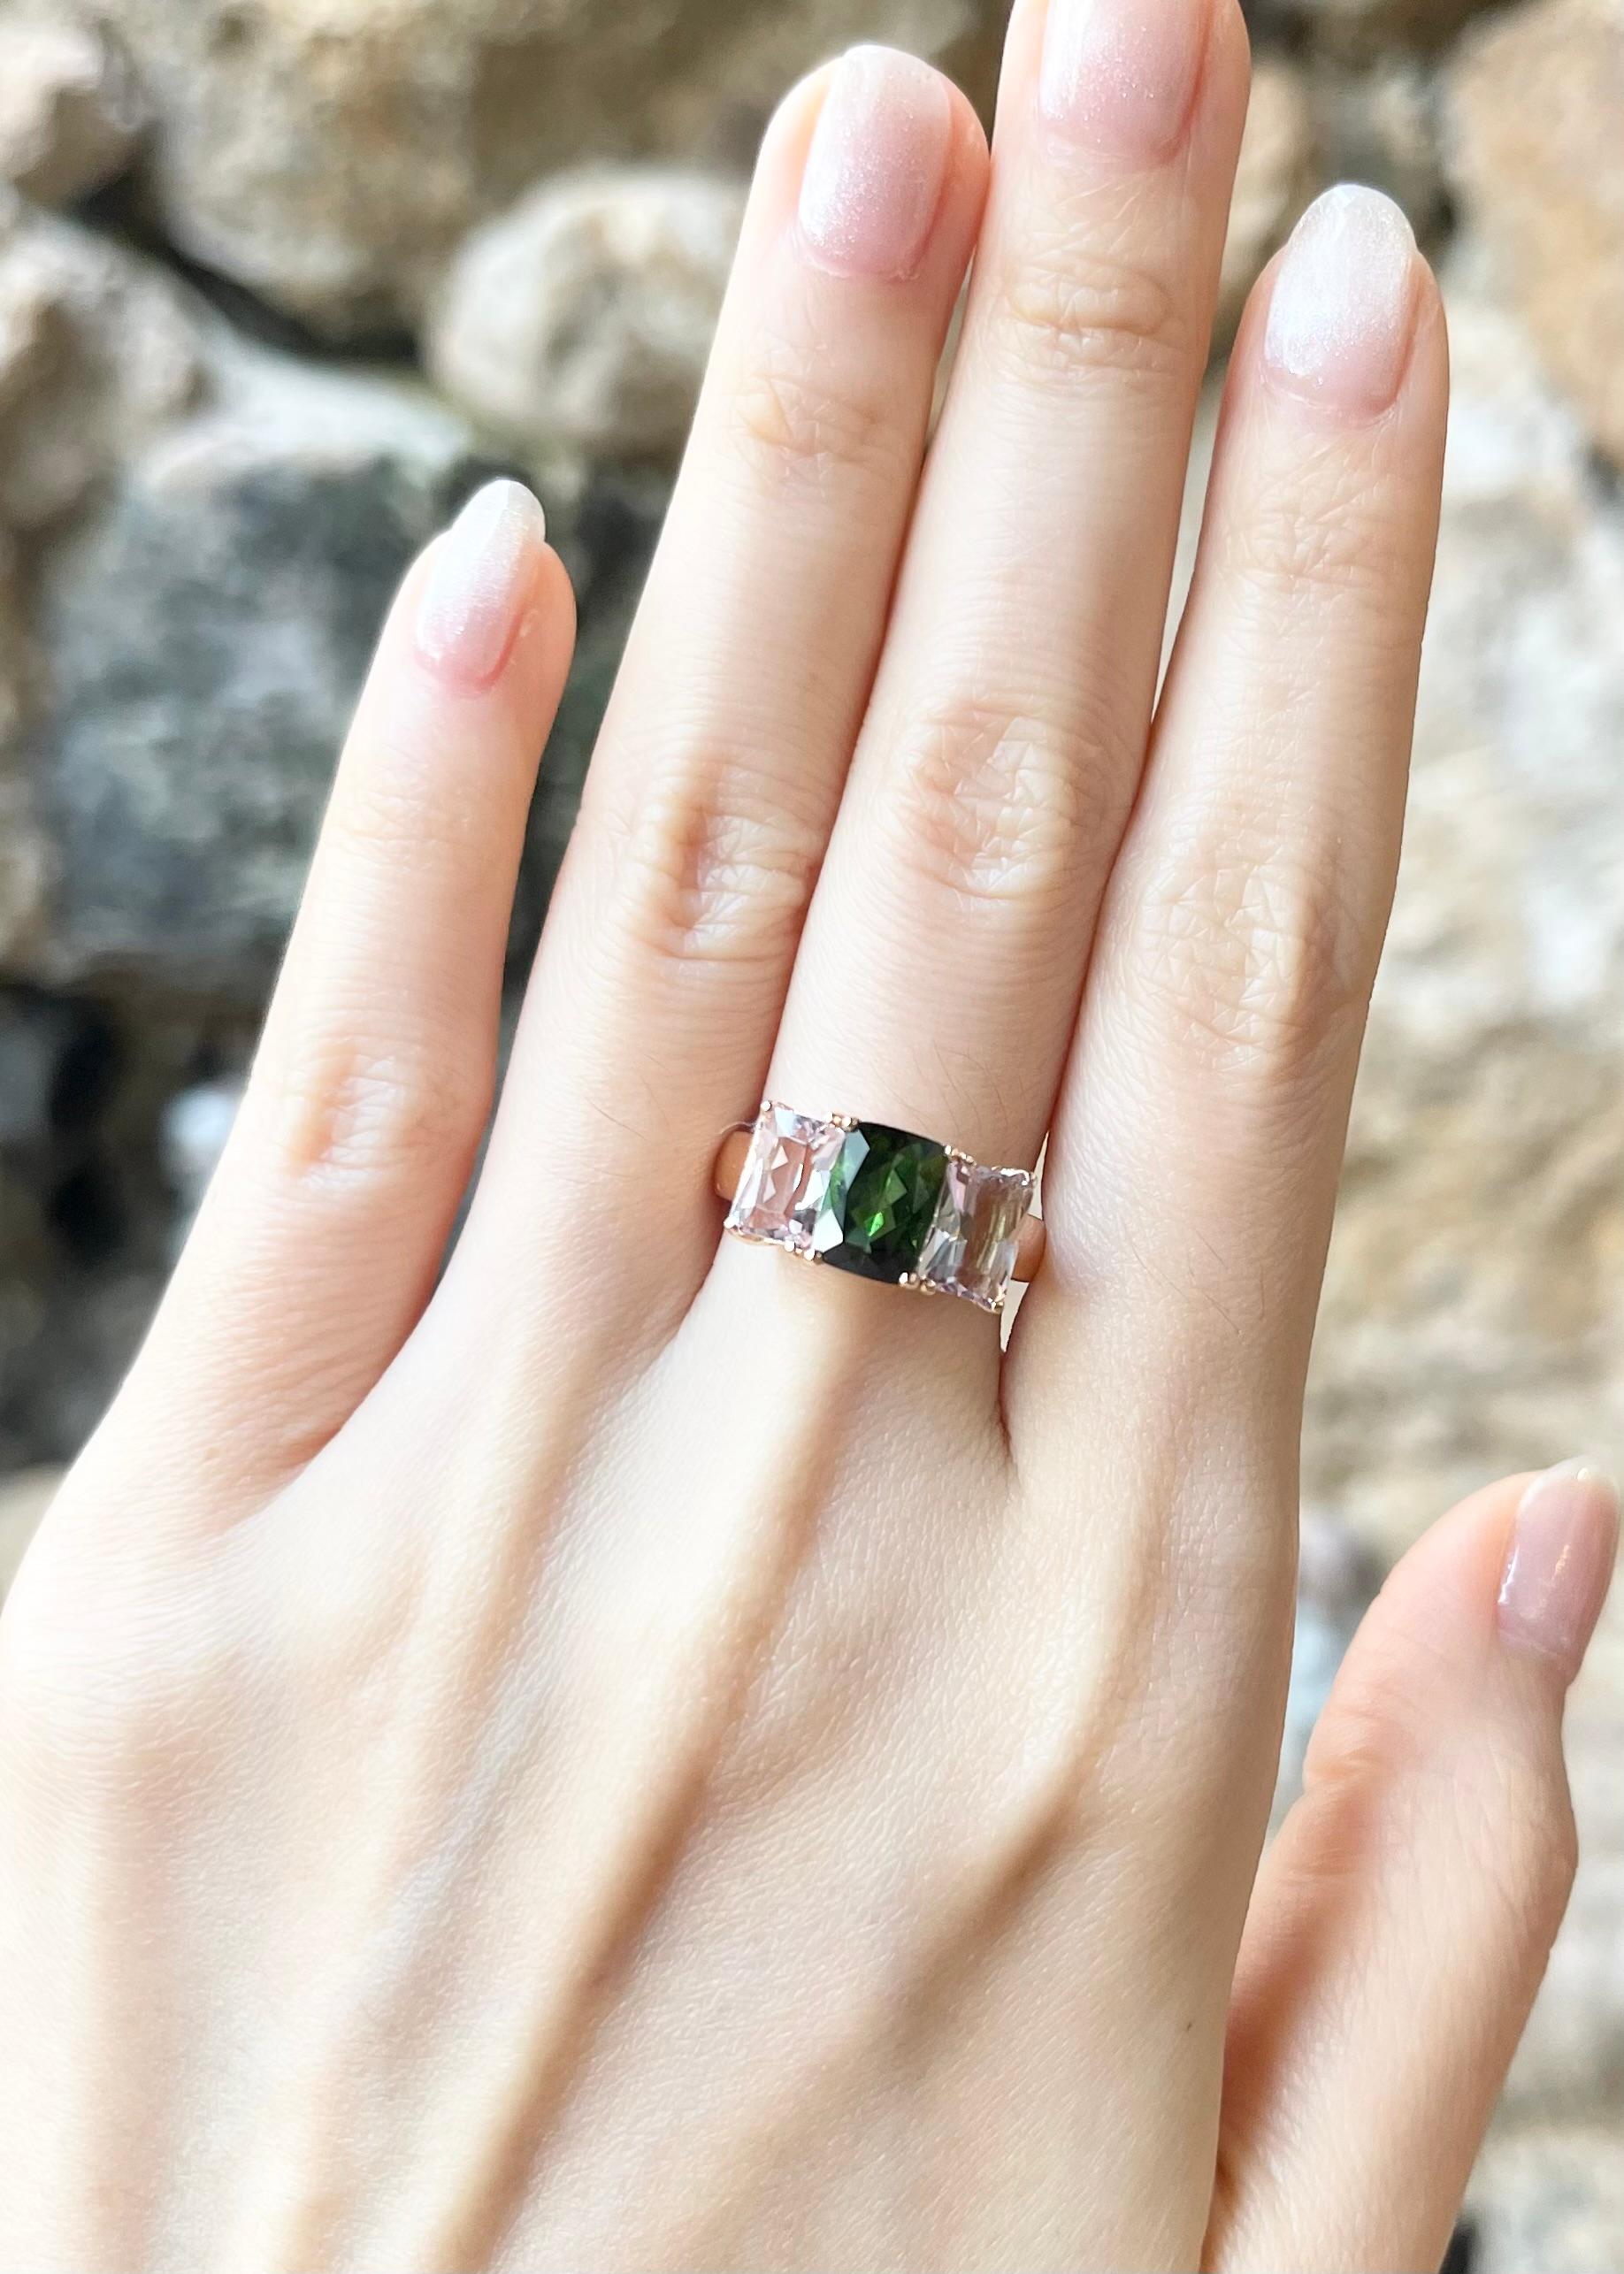 Green Tourmaline 1.78 carats with Morganite 1.99 carats Ring set in 18K Rose Gold Settings

Width:  1.5 cm 
Length: 0.8 cm
Ring Size: 52
Total Weight: 6.09 grams

